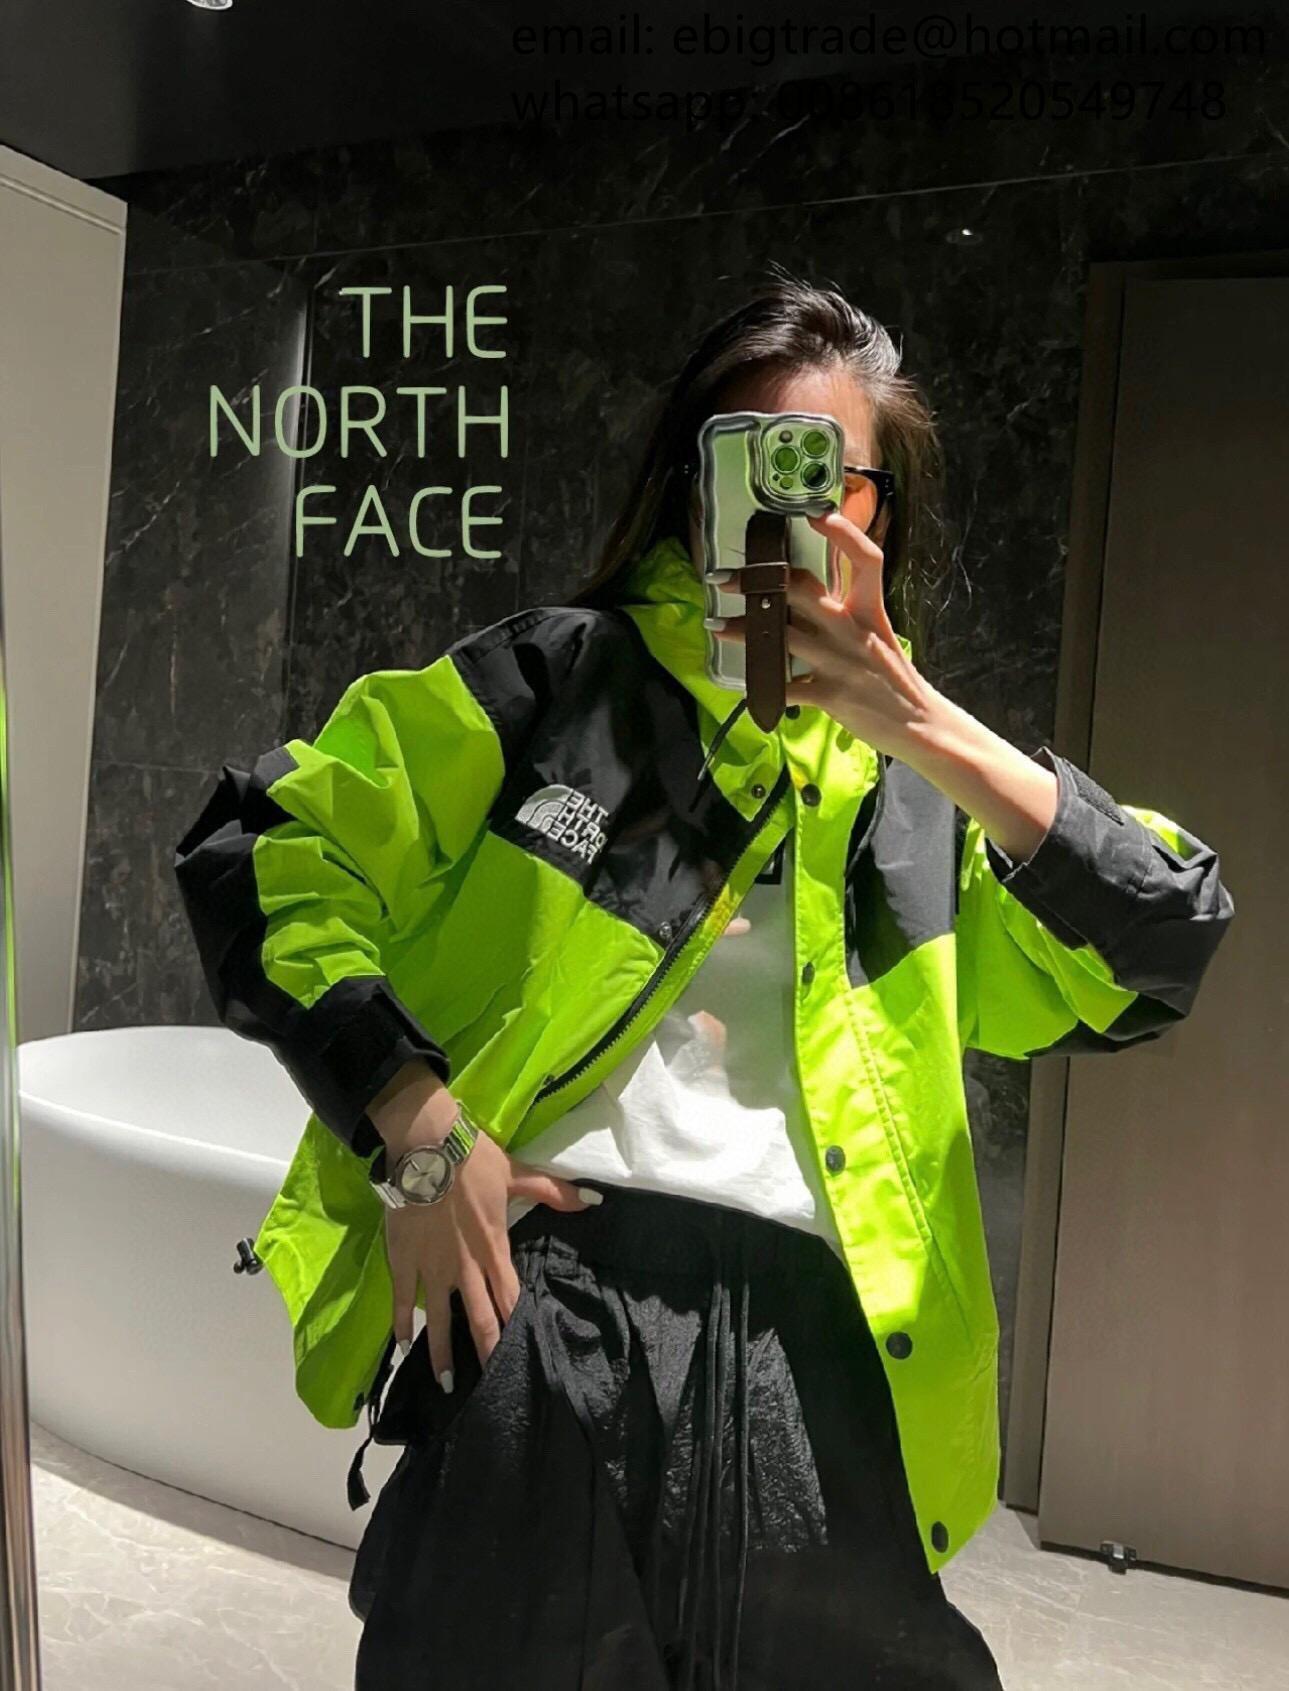  The North Face sale